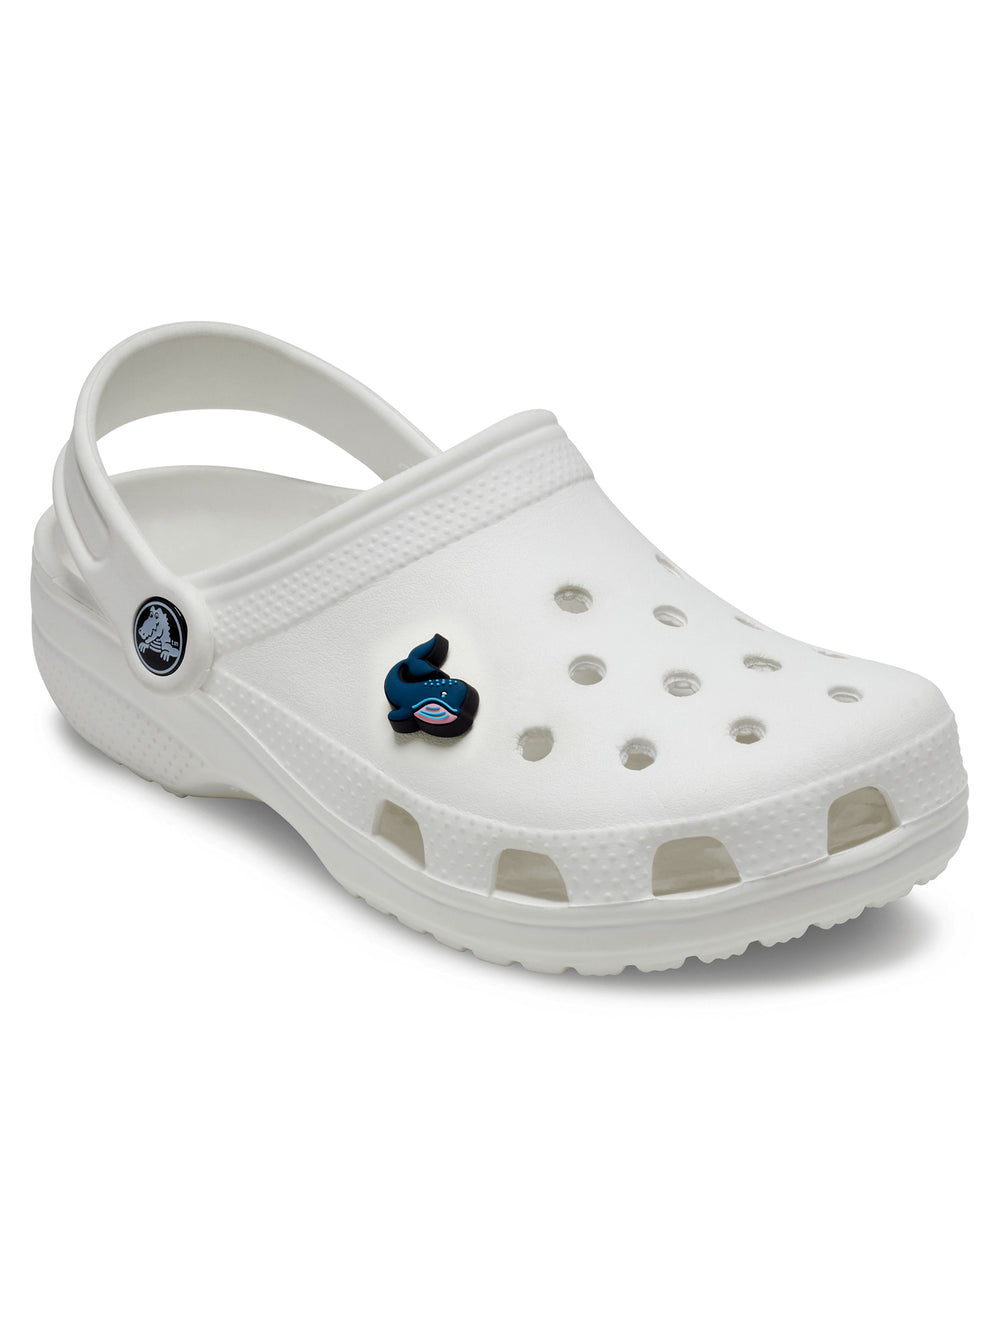 CROCS JIBBITZ - WHILLY WHALE - CLEARANCE